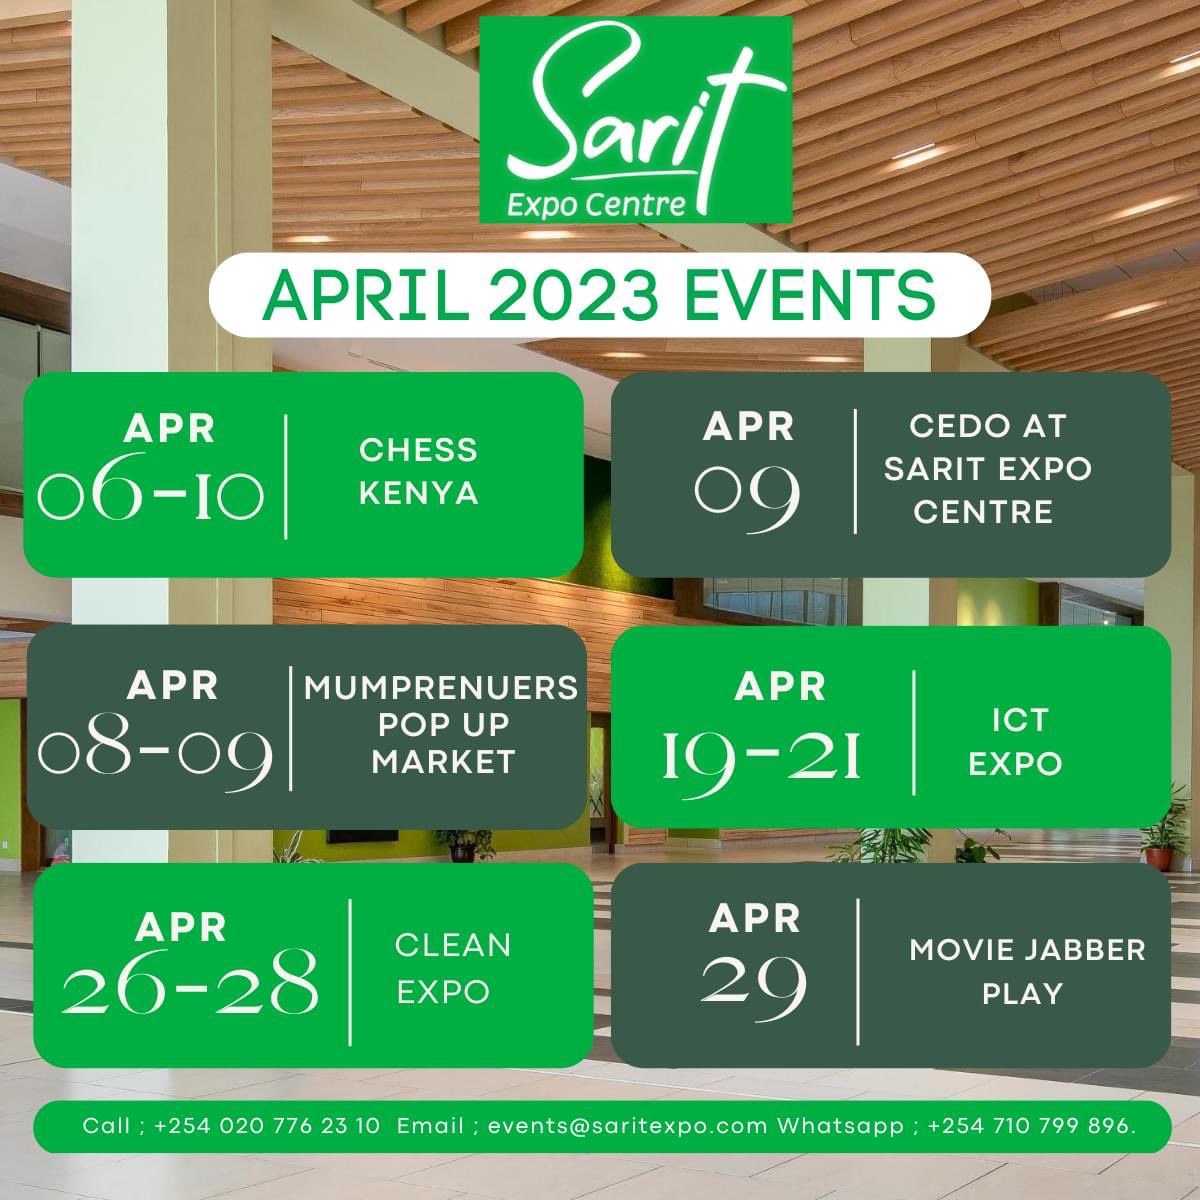 Looking for an event to attend? Check out our upcoming events this April. 
For information Visit,lnkd.in/d3HGVQsA.
Get in touch,lnkd.in/driVjVcY.
#SaritExpoCentre #Sarityourcity #upcomingevents #eventsnairobi #nairobi #kenya #eventke #2023events #ExpoKenya